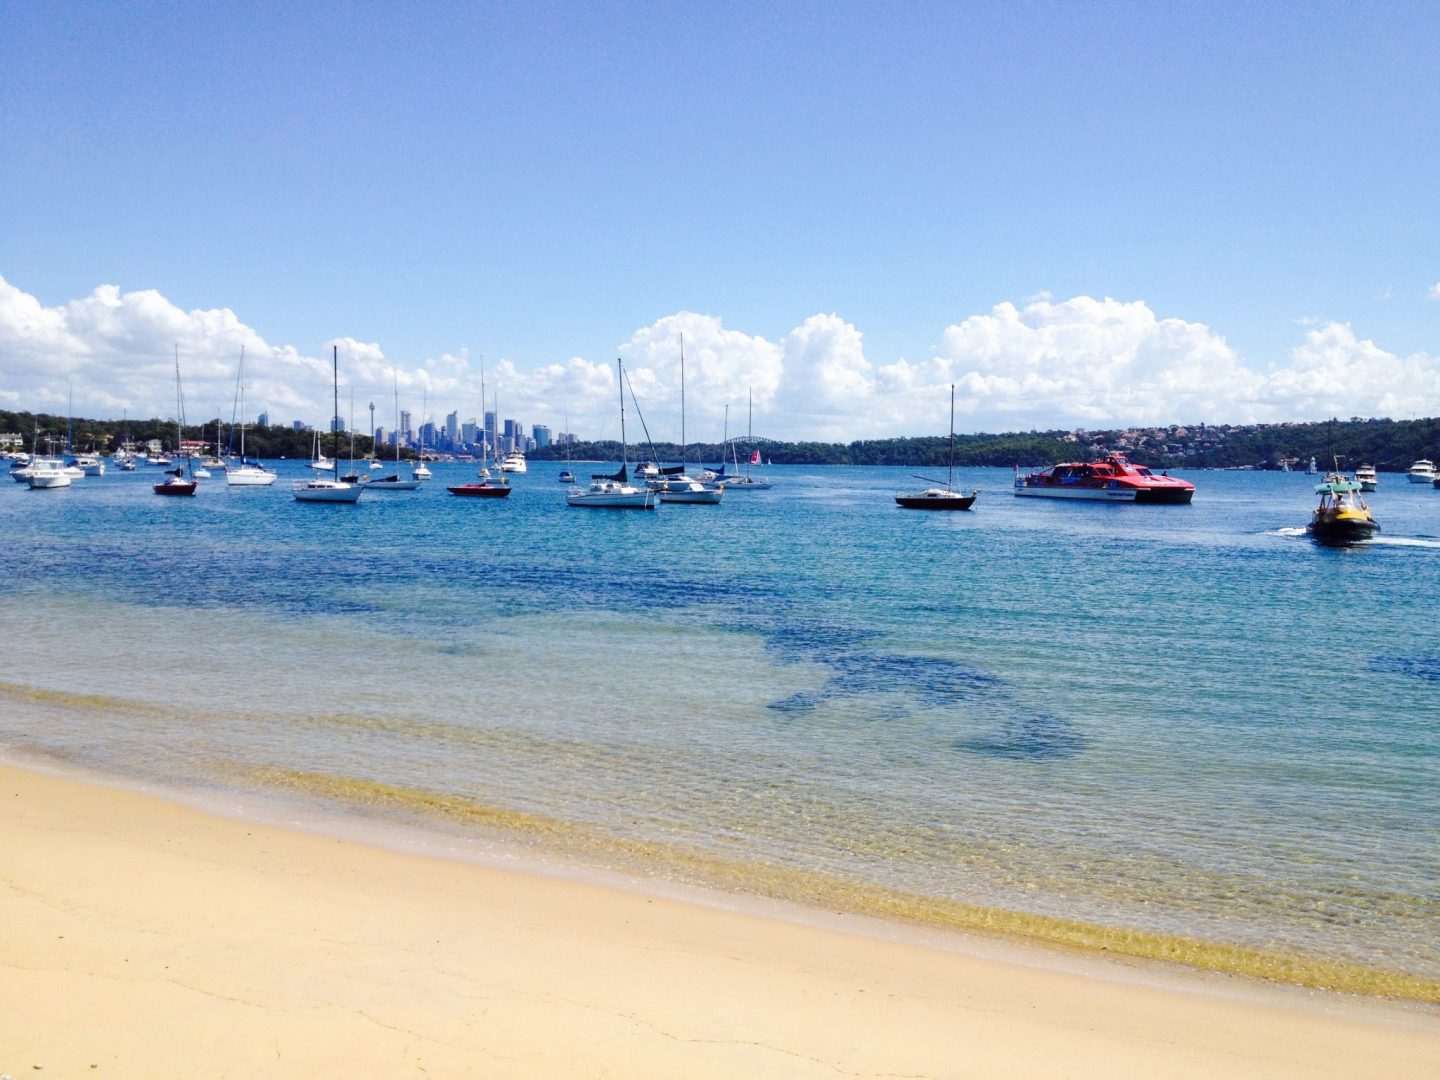 View to Sydney from Watsons Bay